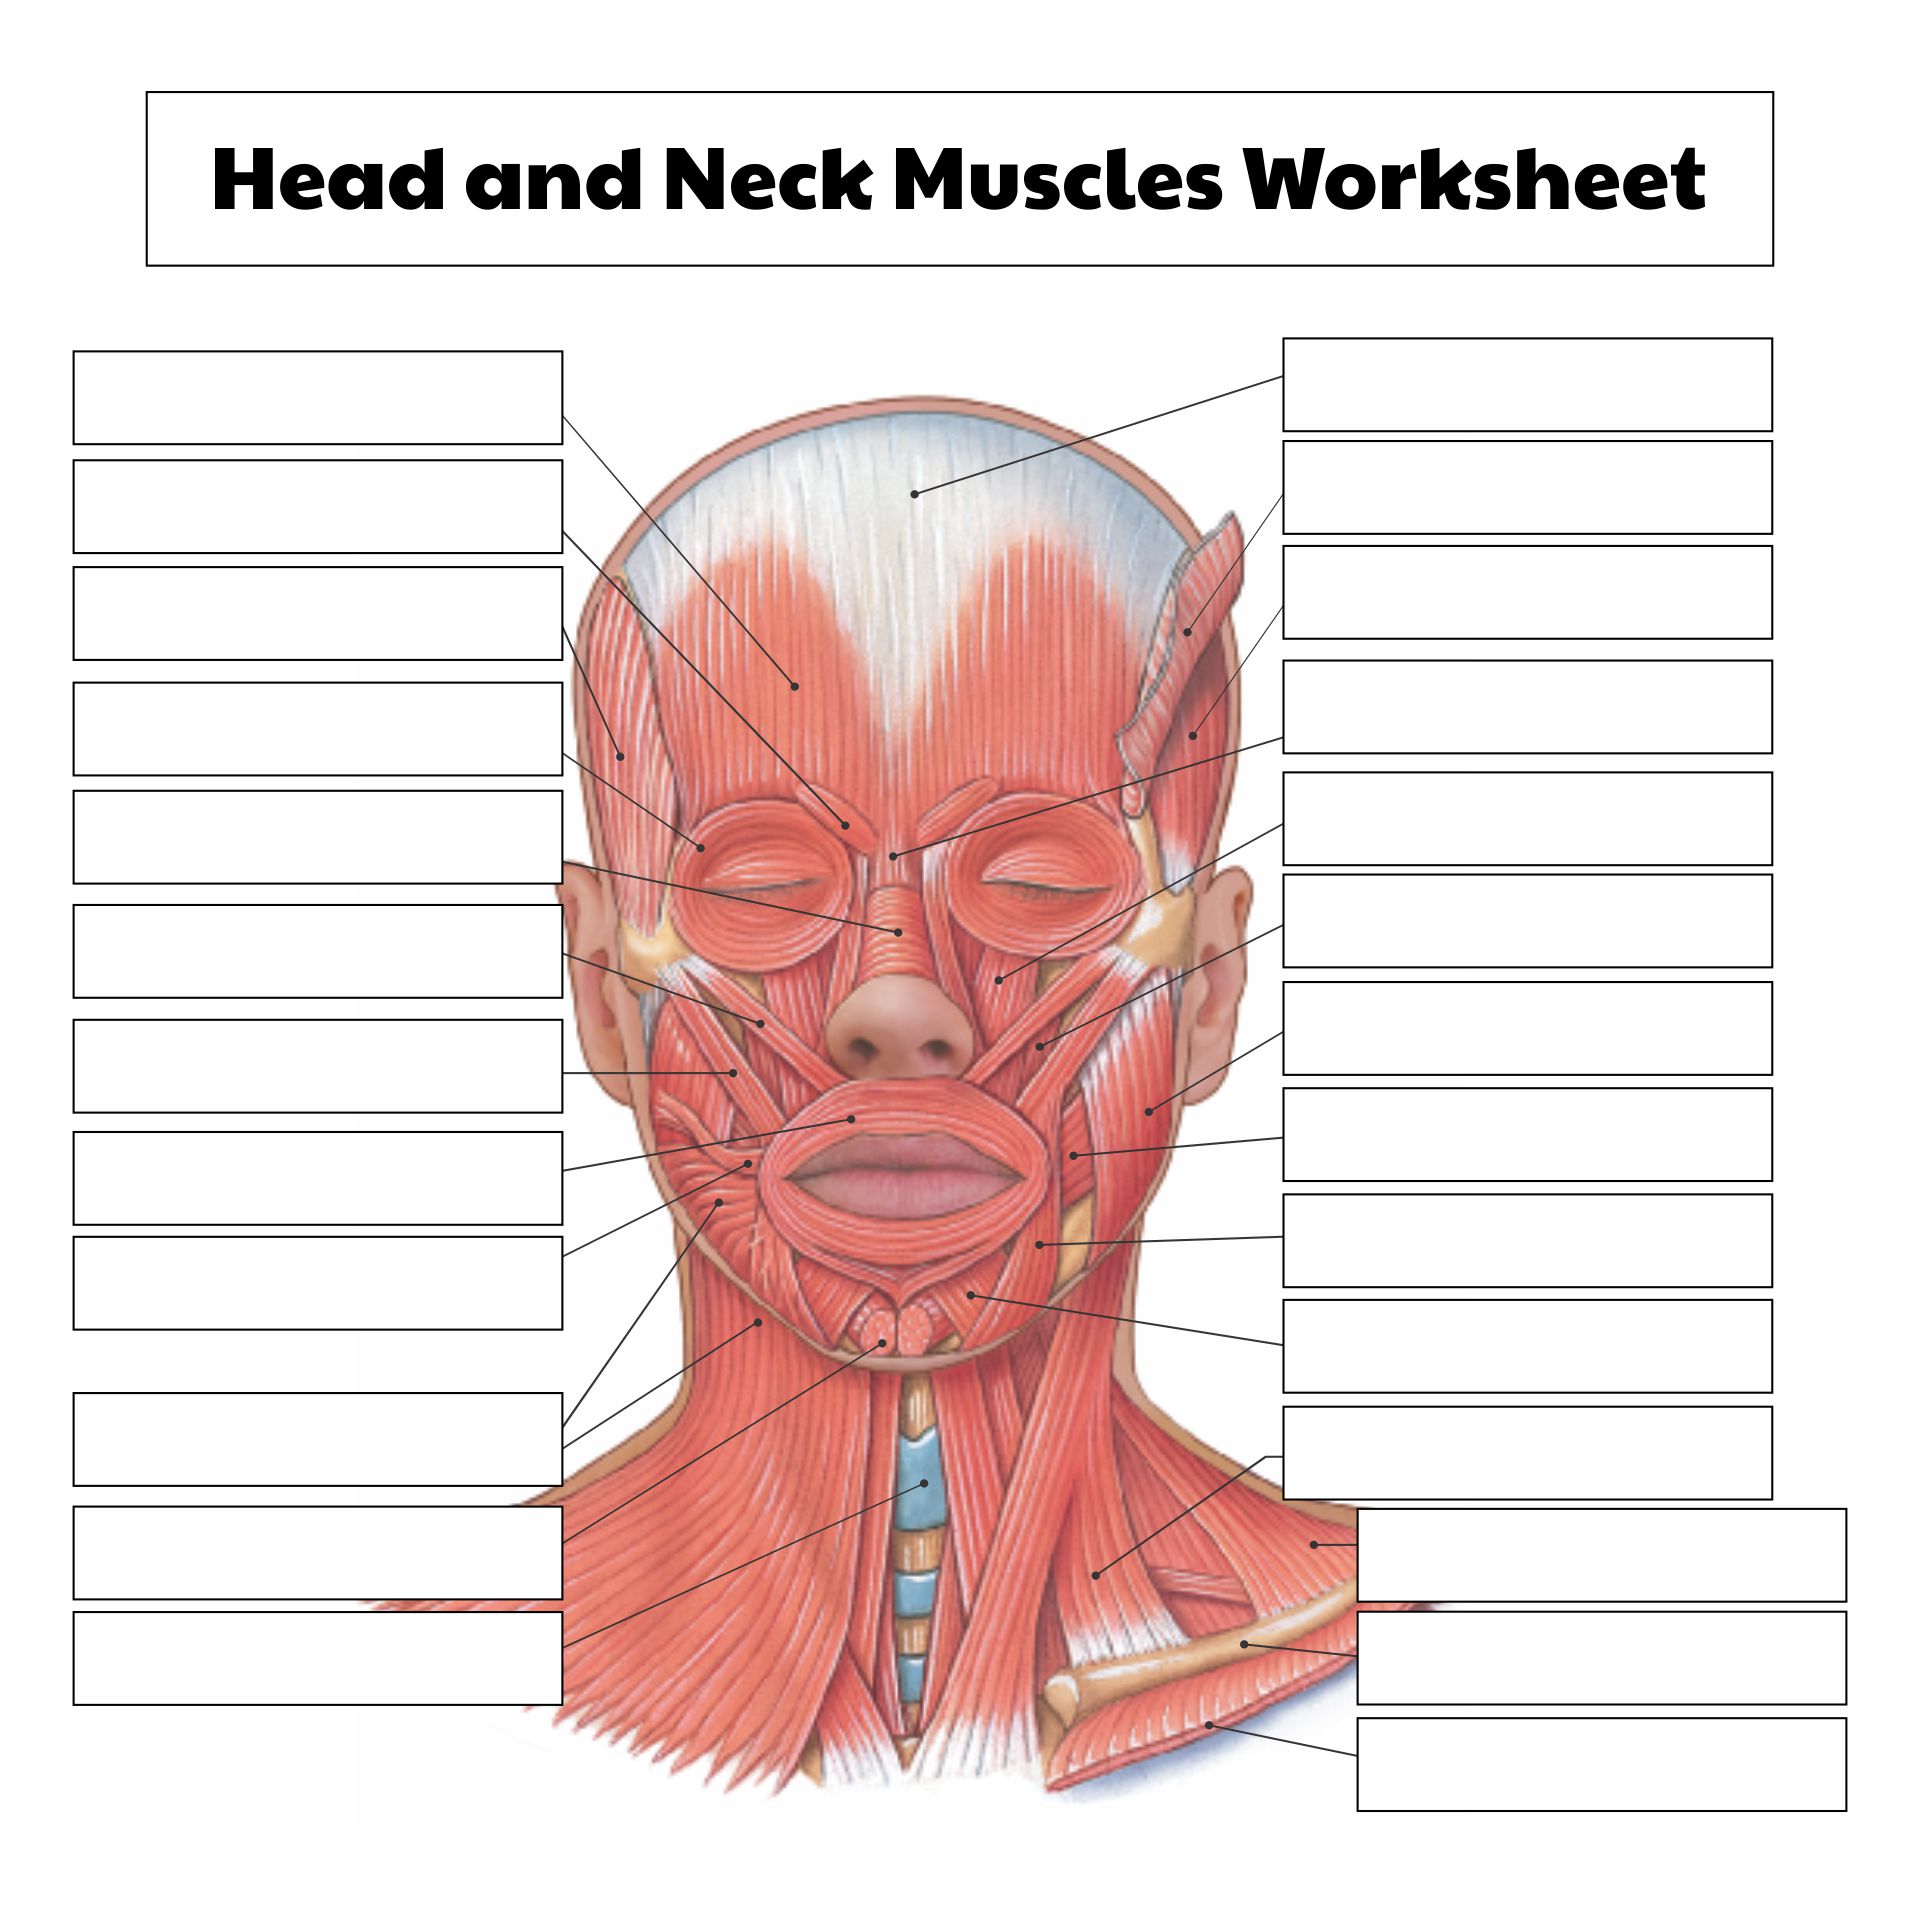 5 Best Images of Printable College Anatomy Worksheets Muscles